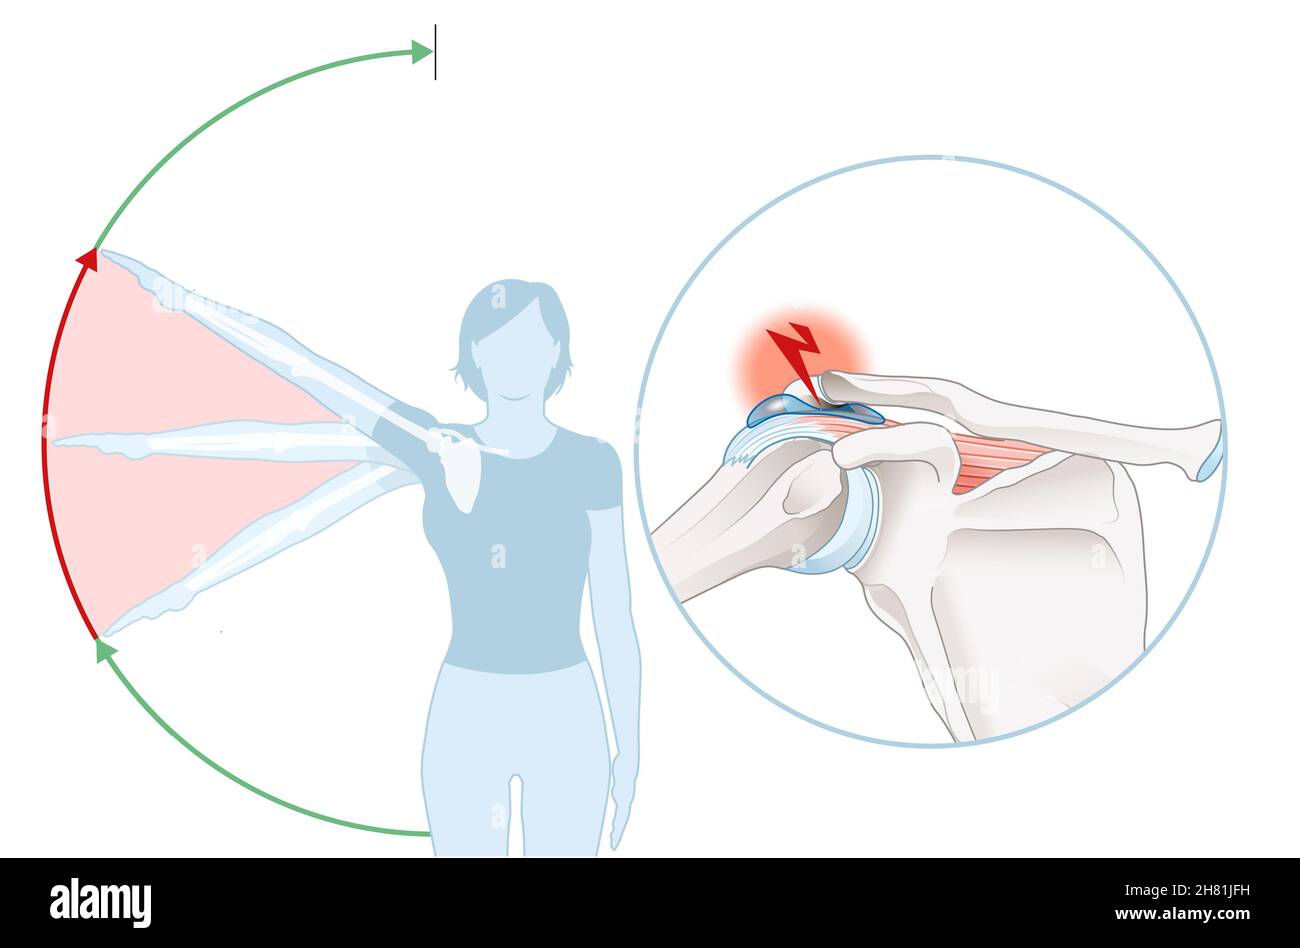 Illustration showing shoulder impingement syndrome and painful arc Stock Photo